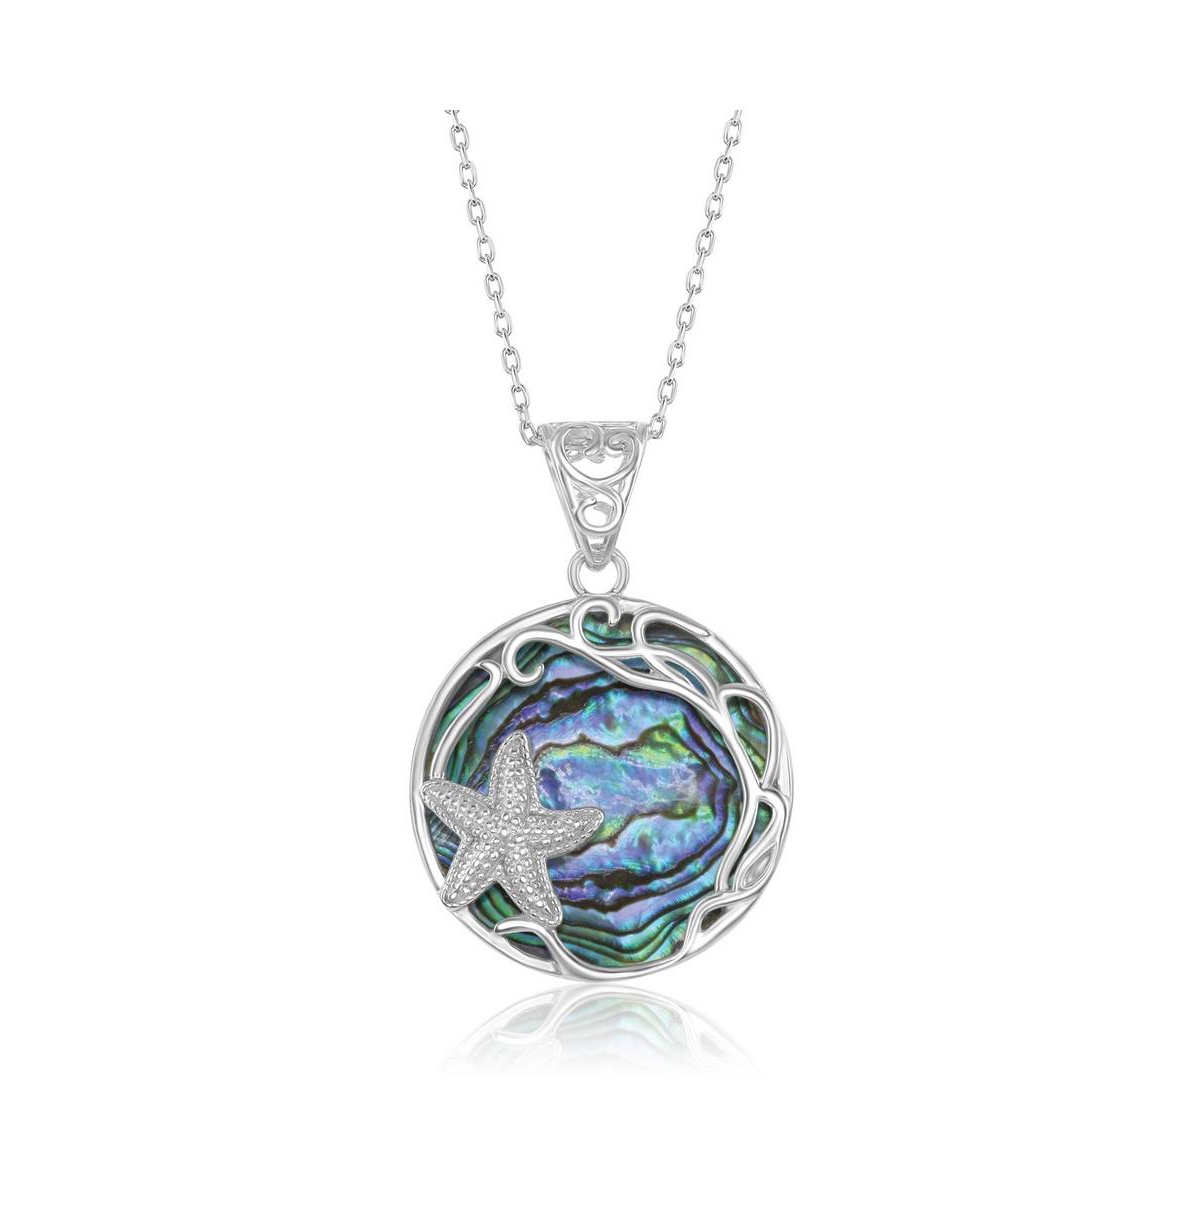 Sterling Silver Round Abalone with Starfish & Filigree Design Pendant Necklace - Silver